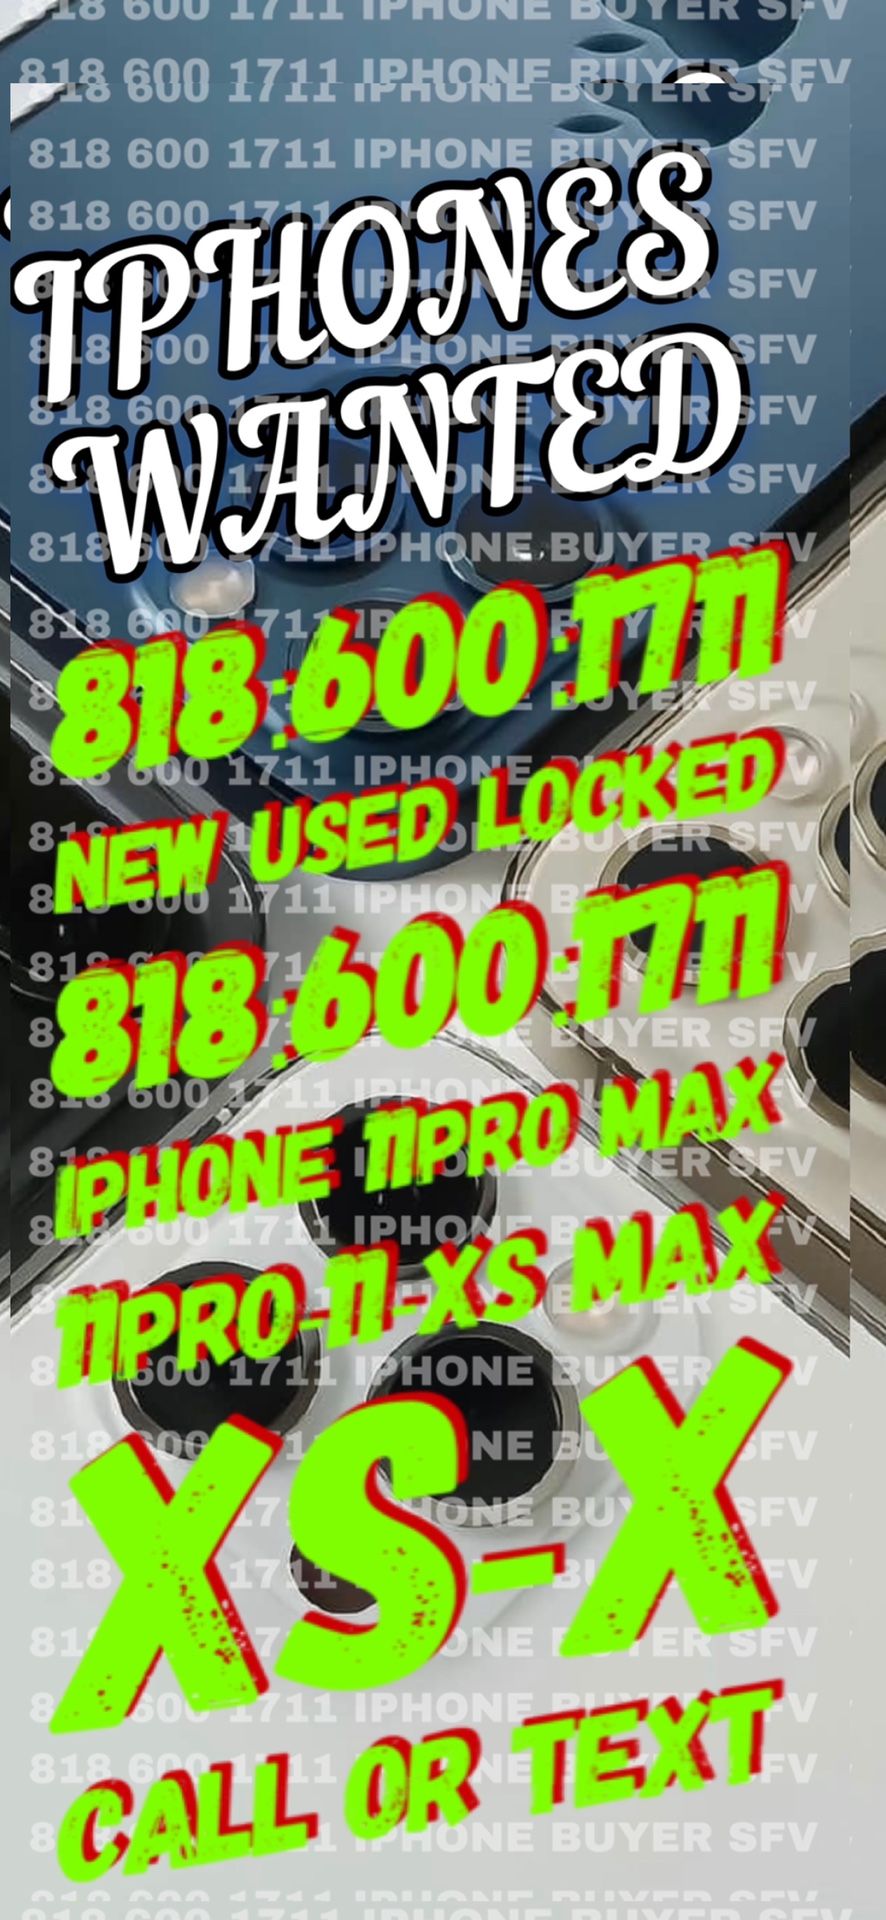 iPhone 11 Pro Max 12 pro blacklisted iCloud new Xs xs Max x phone sealed iPad Air 12.9 WiFi cellular Apple Watch 6 MacBook Pro 13” 2020 Touch sealed